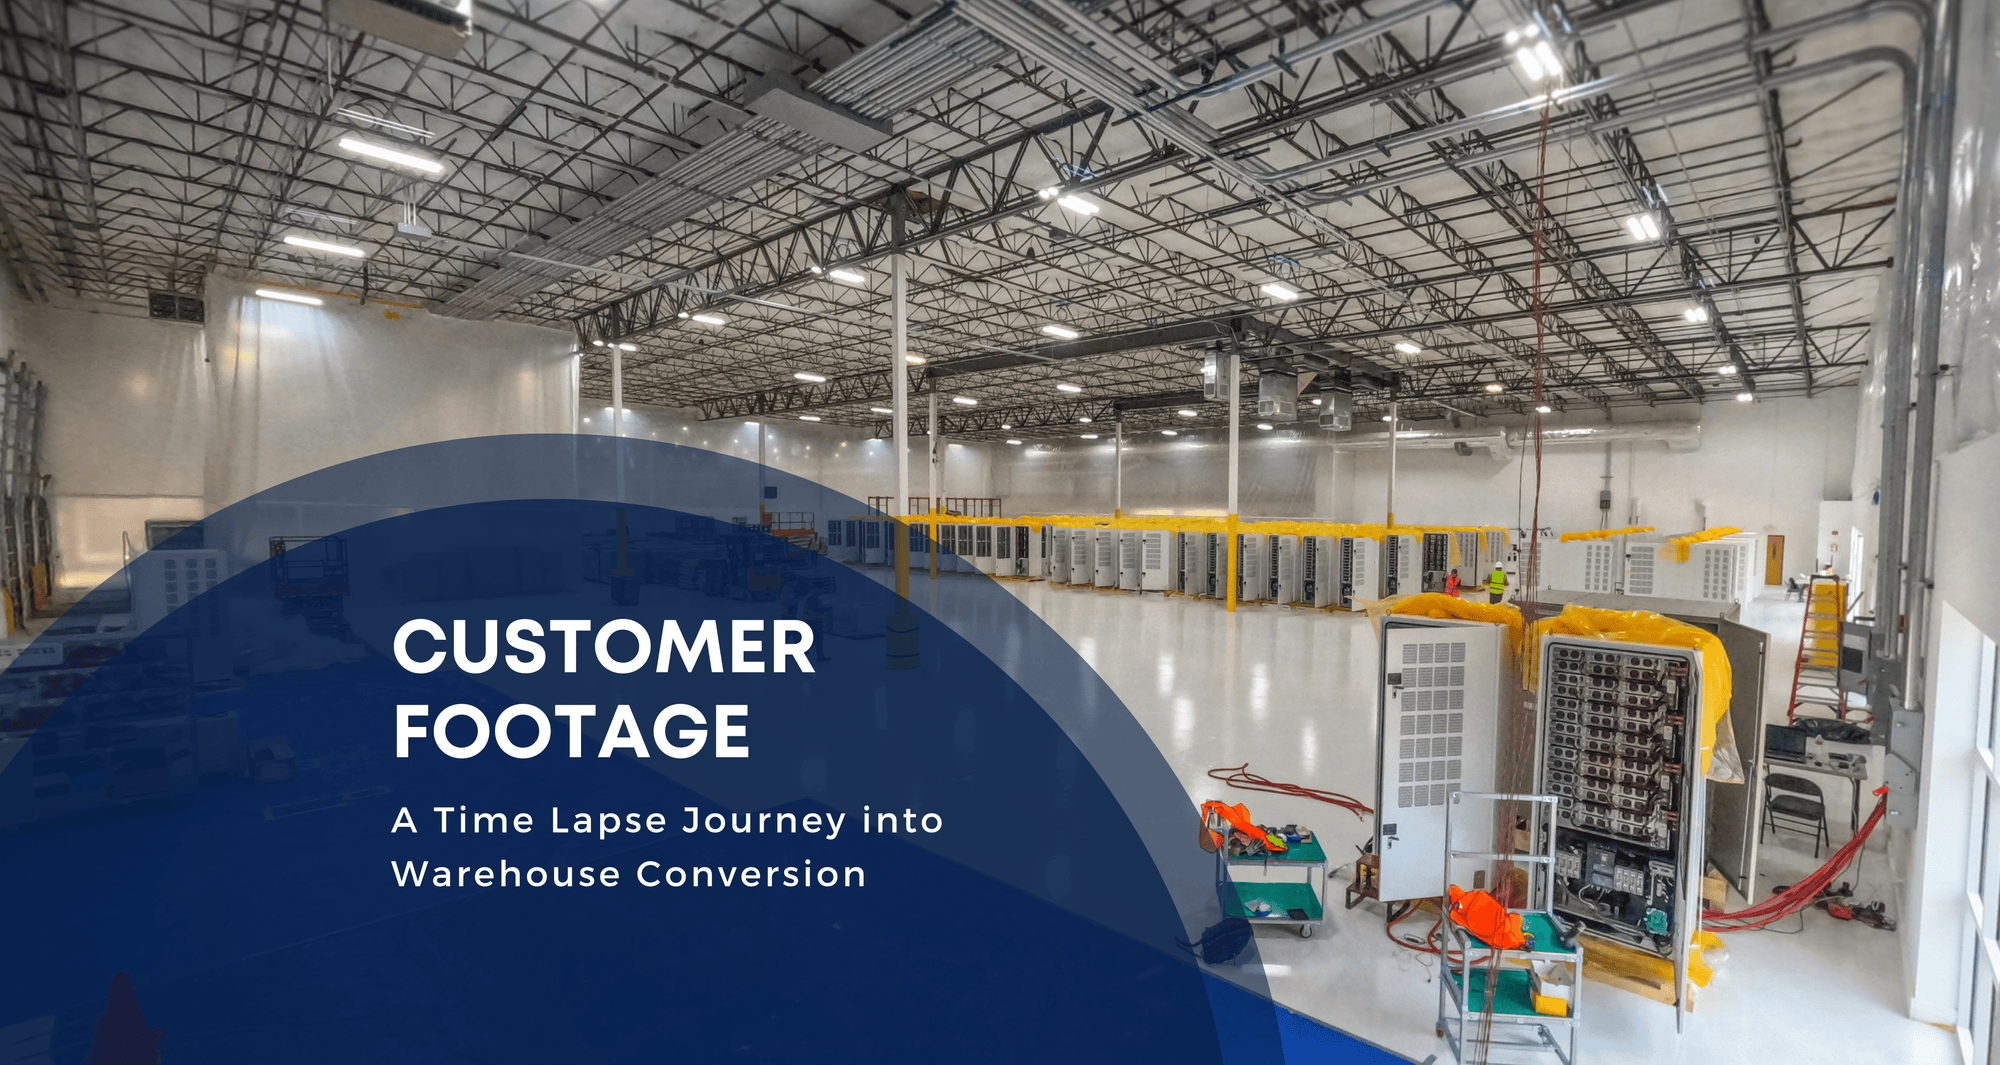 Customer Footage: A Time Lapse Journey into Warehouse Conversion